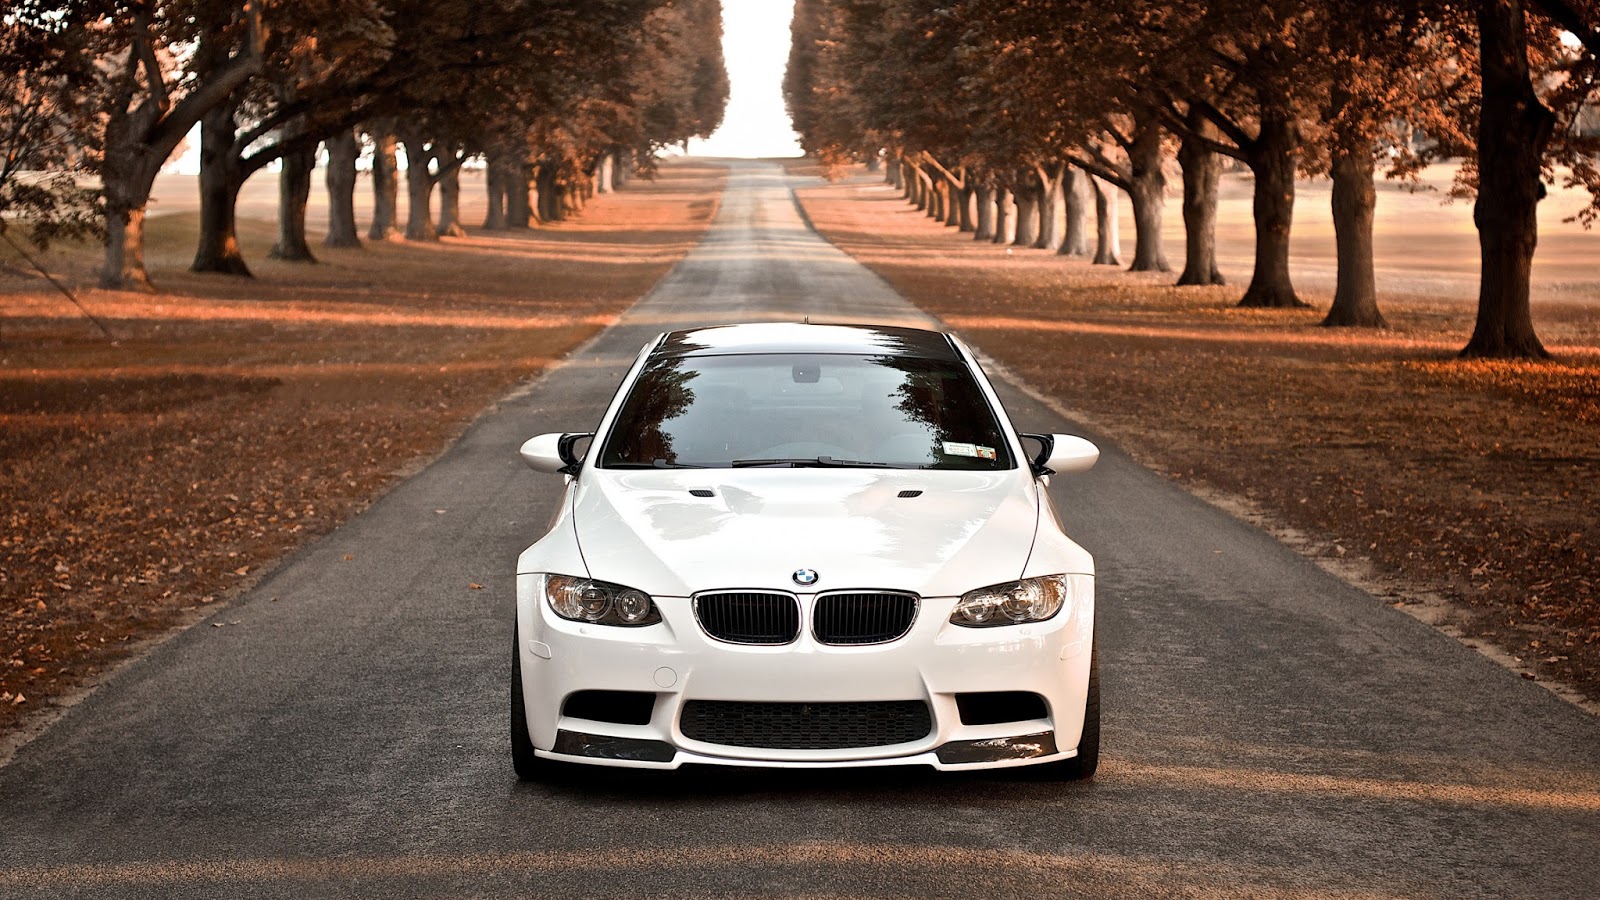 Bmw Cars Wallpapers Hd Free Download Hd Wallpapers, - Hd Wallpaper Pc Bmw - HD Wallpaper 